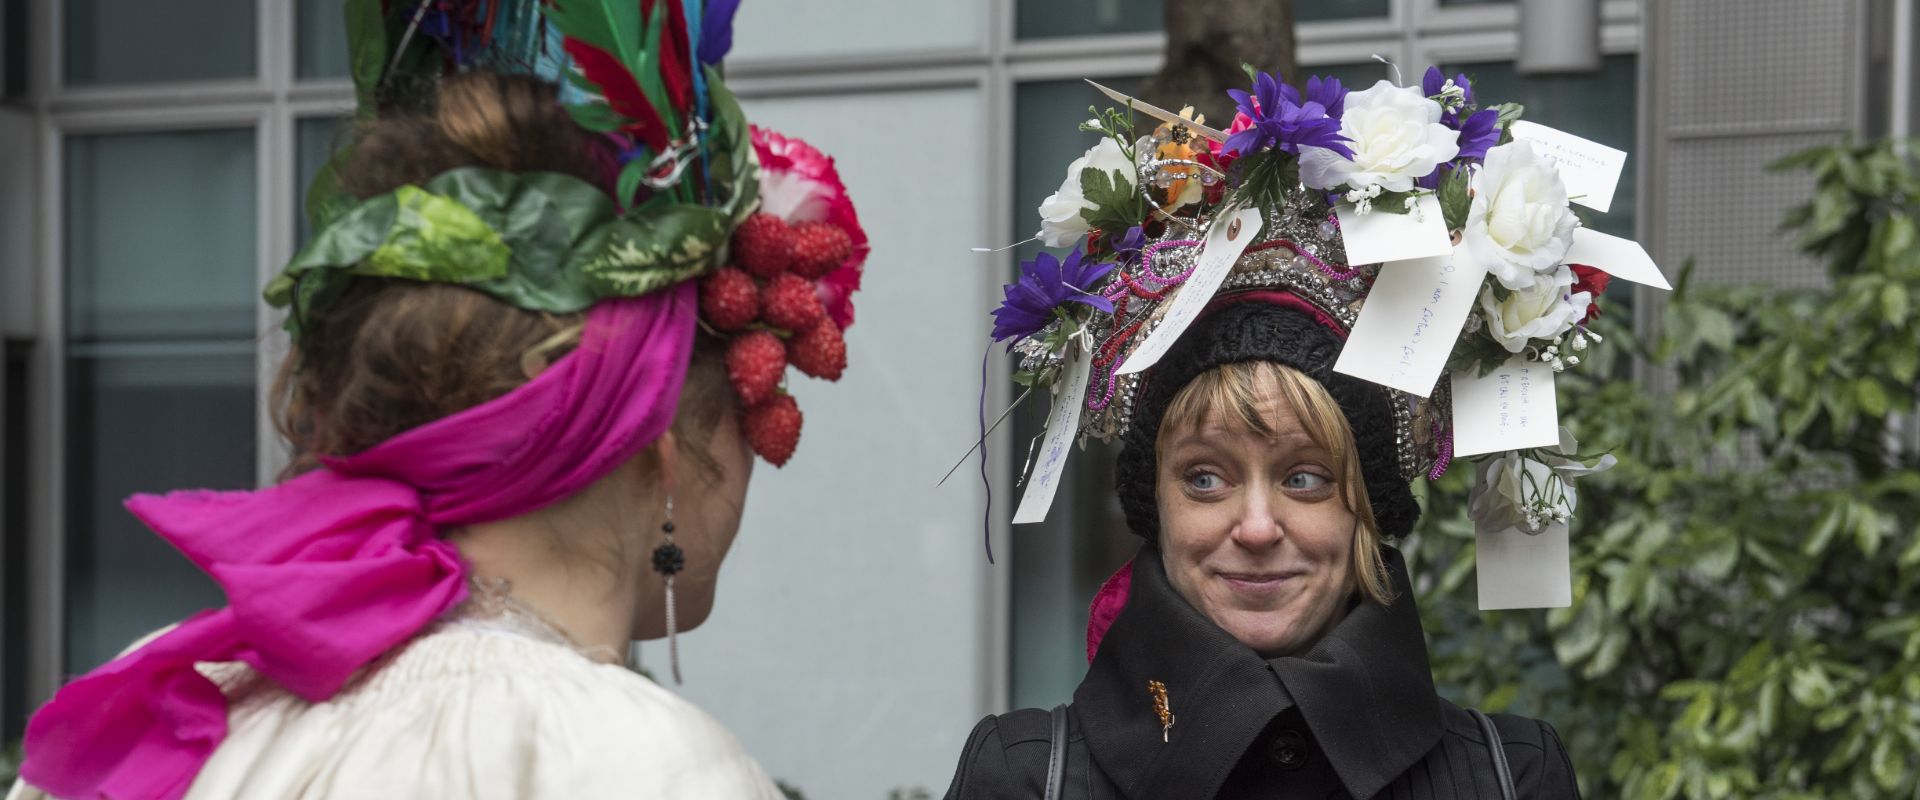 An audience member is wearing a headdress, and it is decorated with flowers and luggage labels.